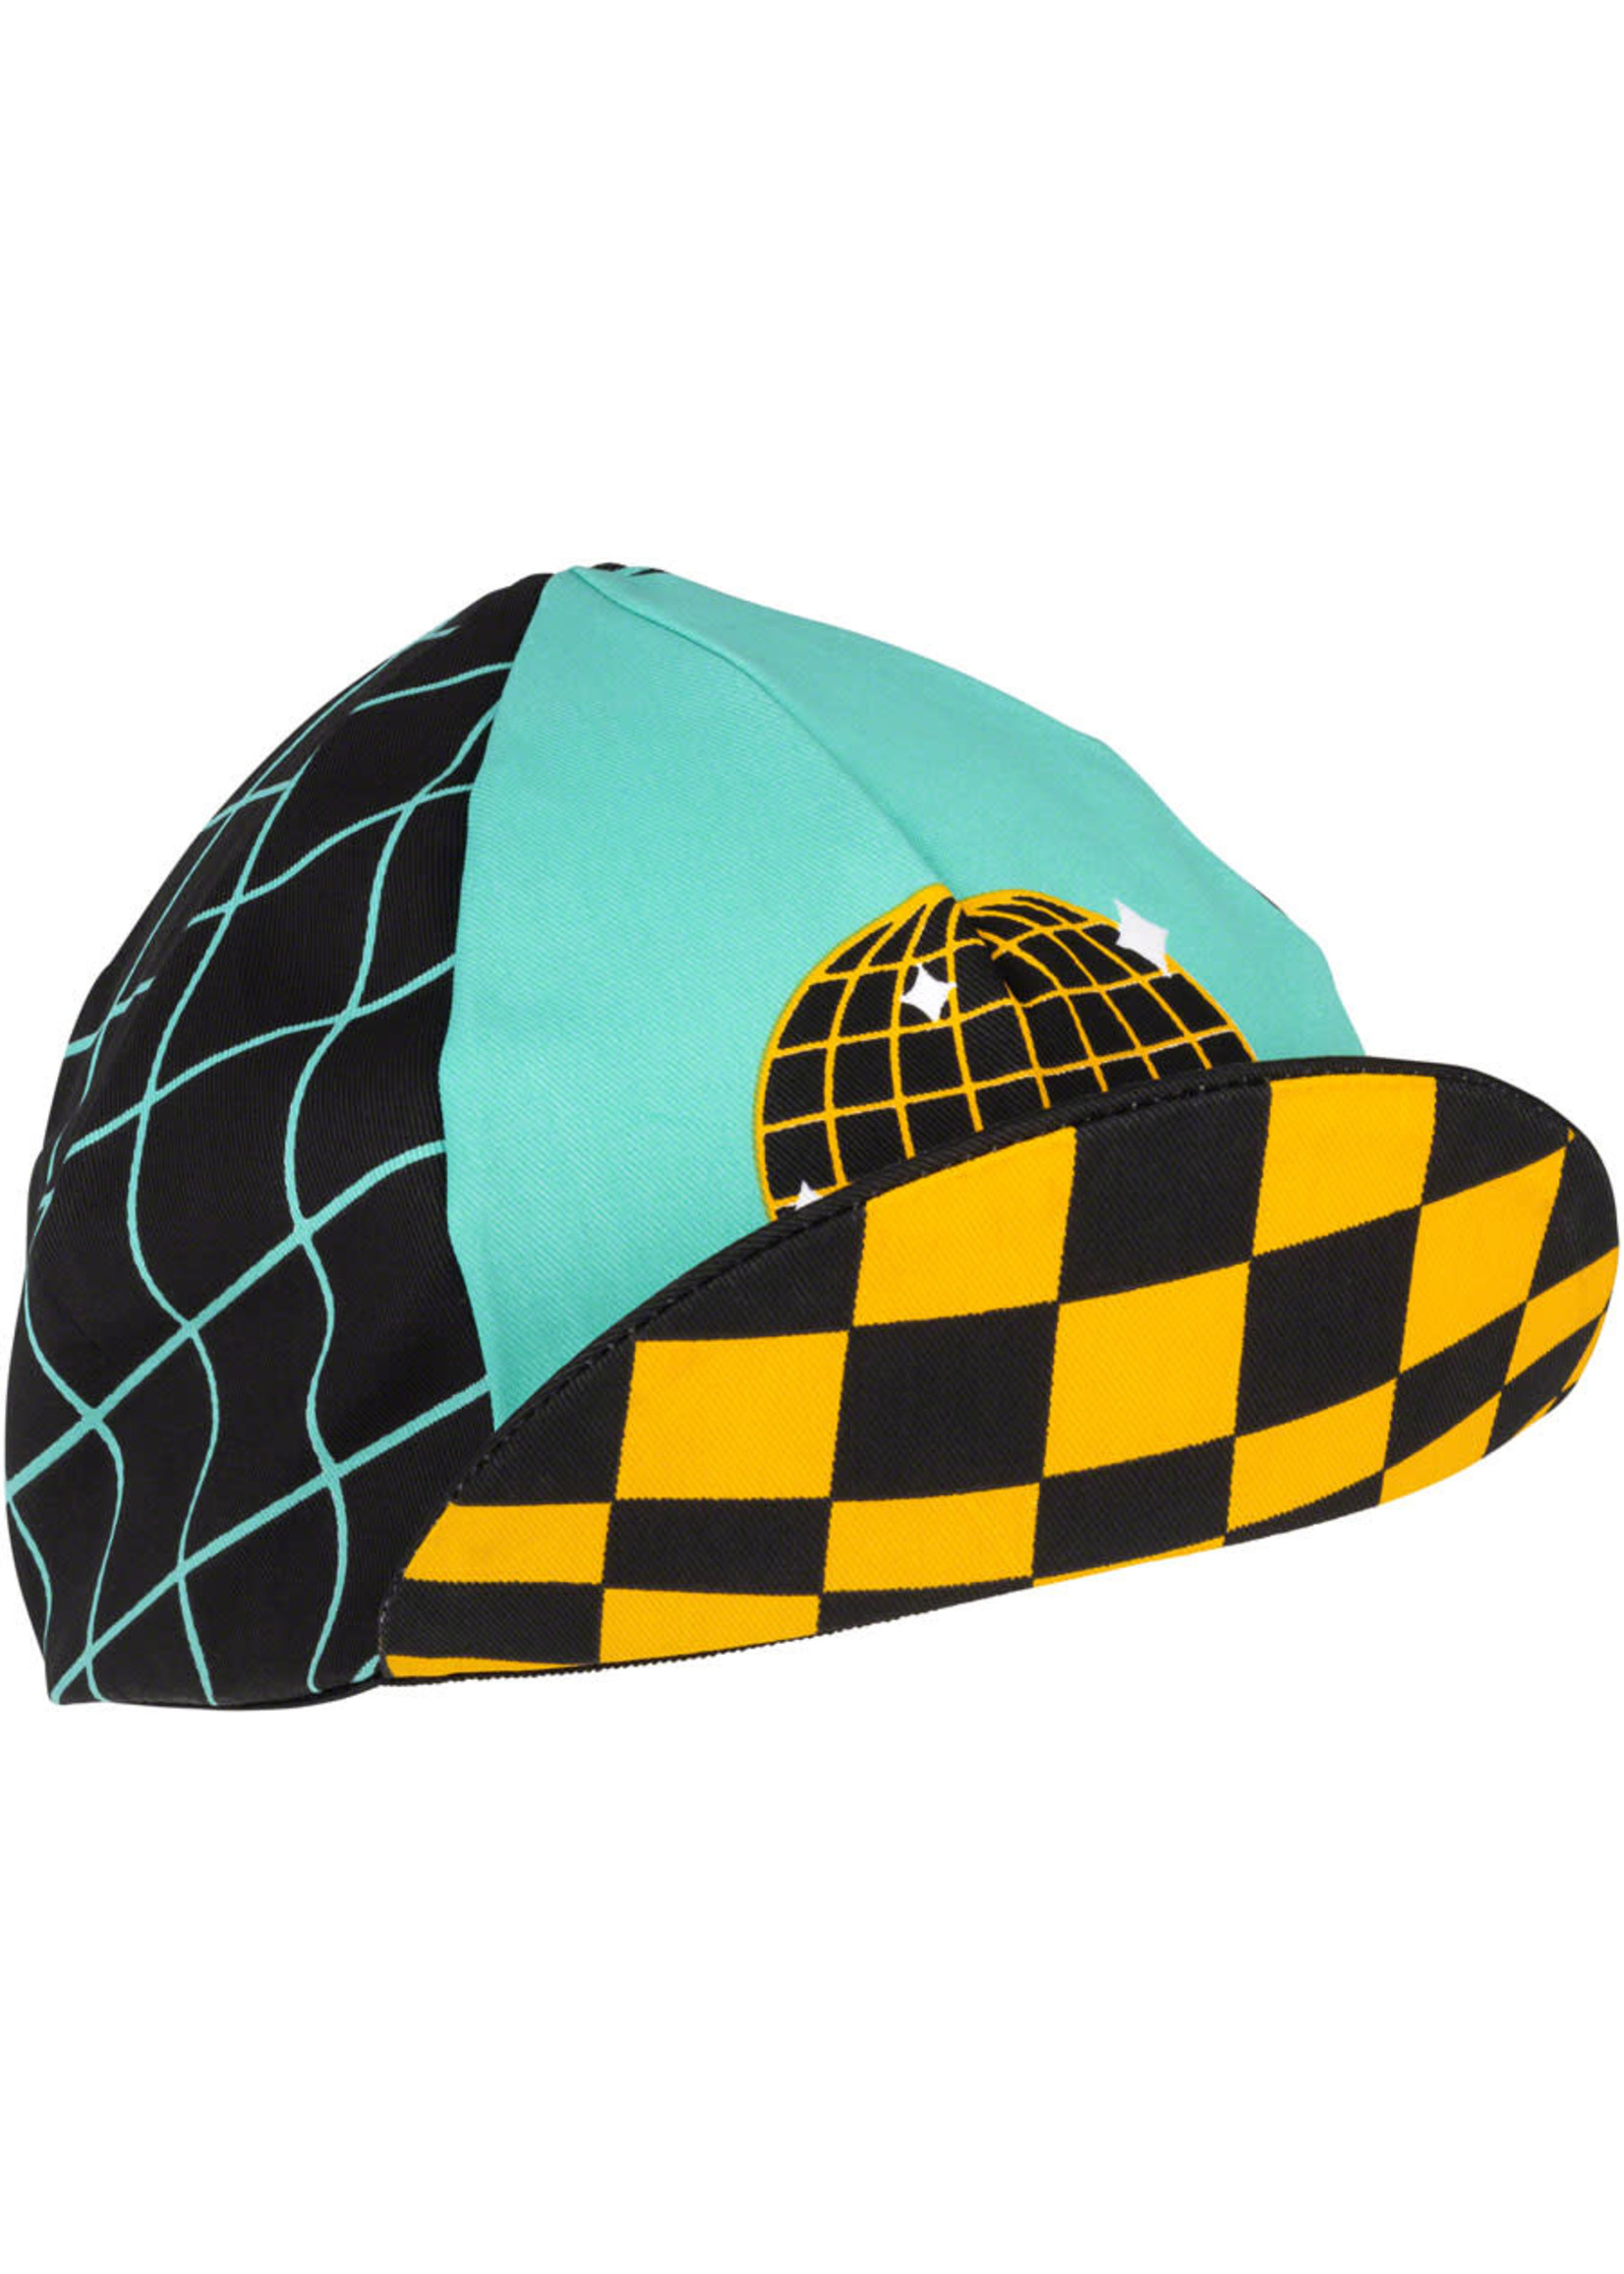 Gapette All-City Club Tropic - Black, Goldenrod, Teal, Taille unique